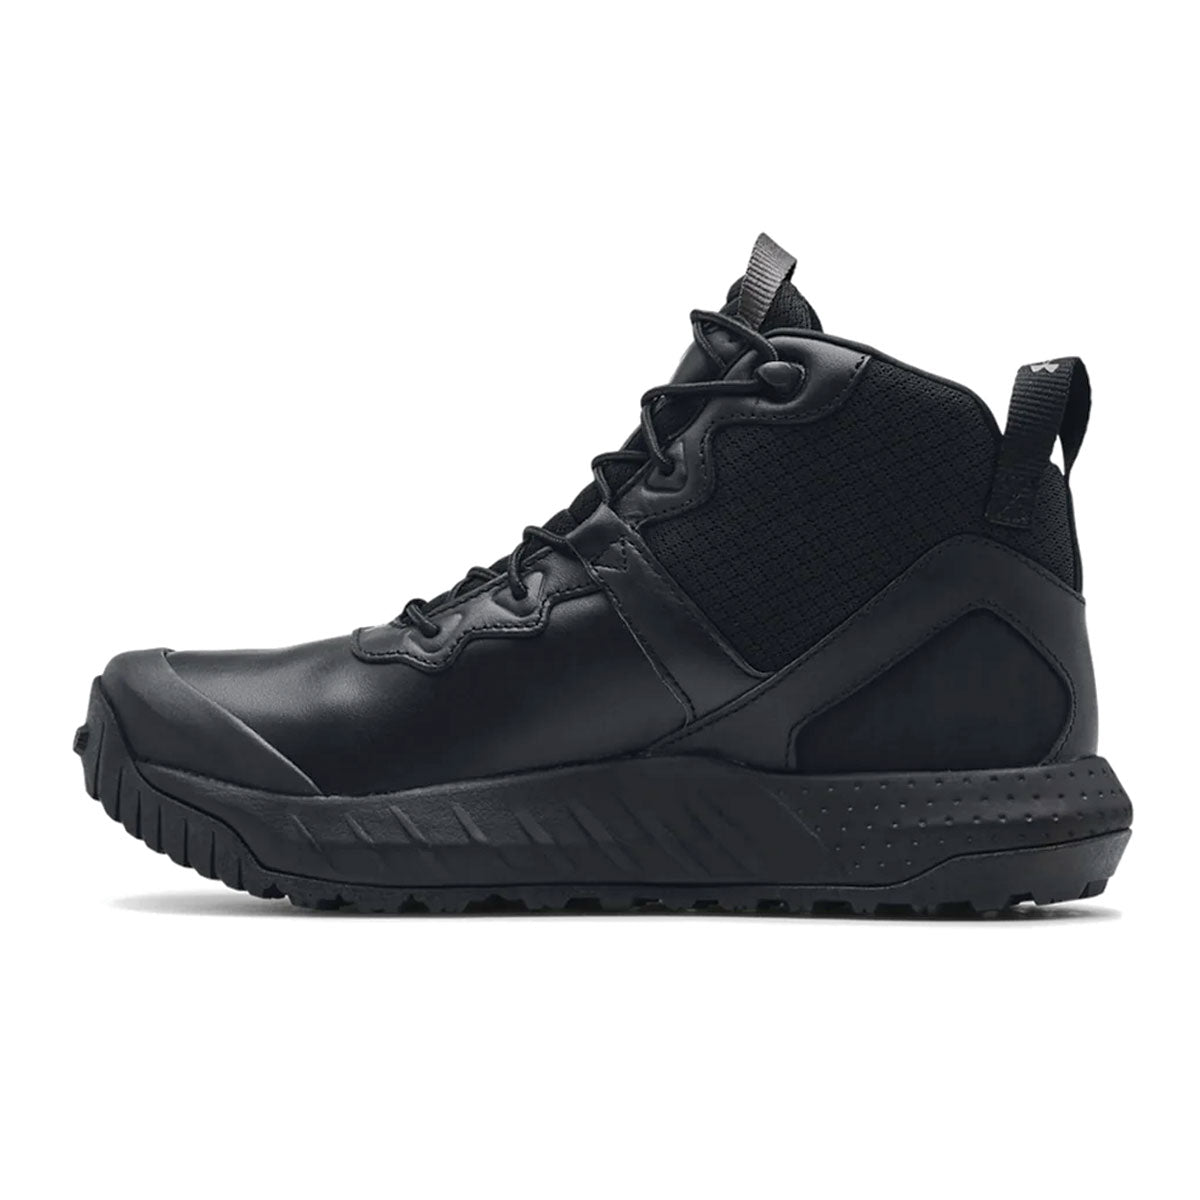 Under Armour Women's UA Micro G Valsetz Mid 6 Tactical Boots FREE SHIPPING!